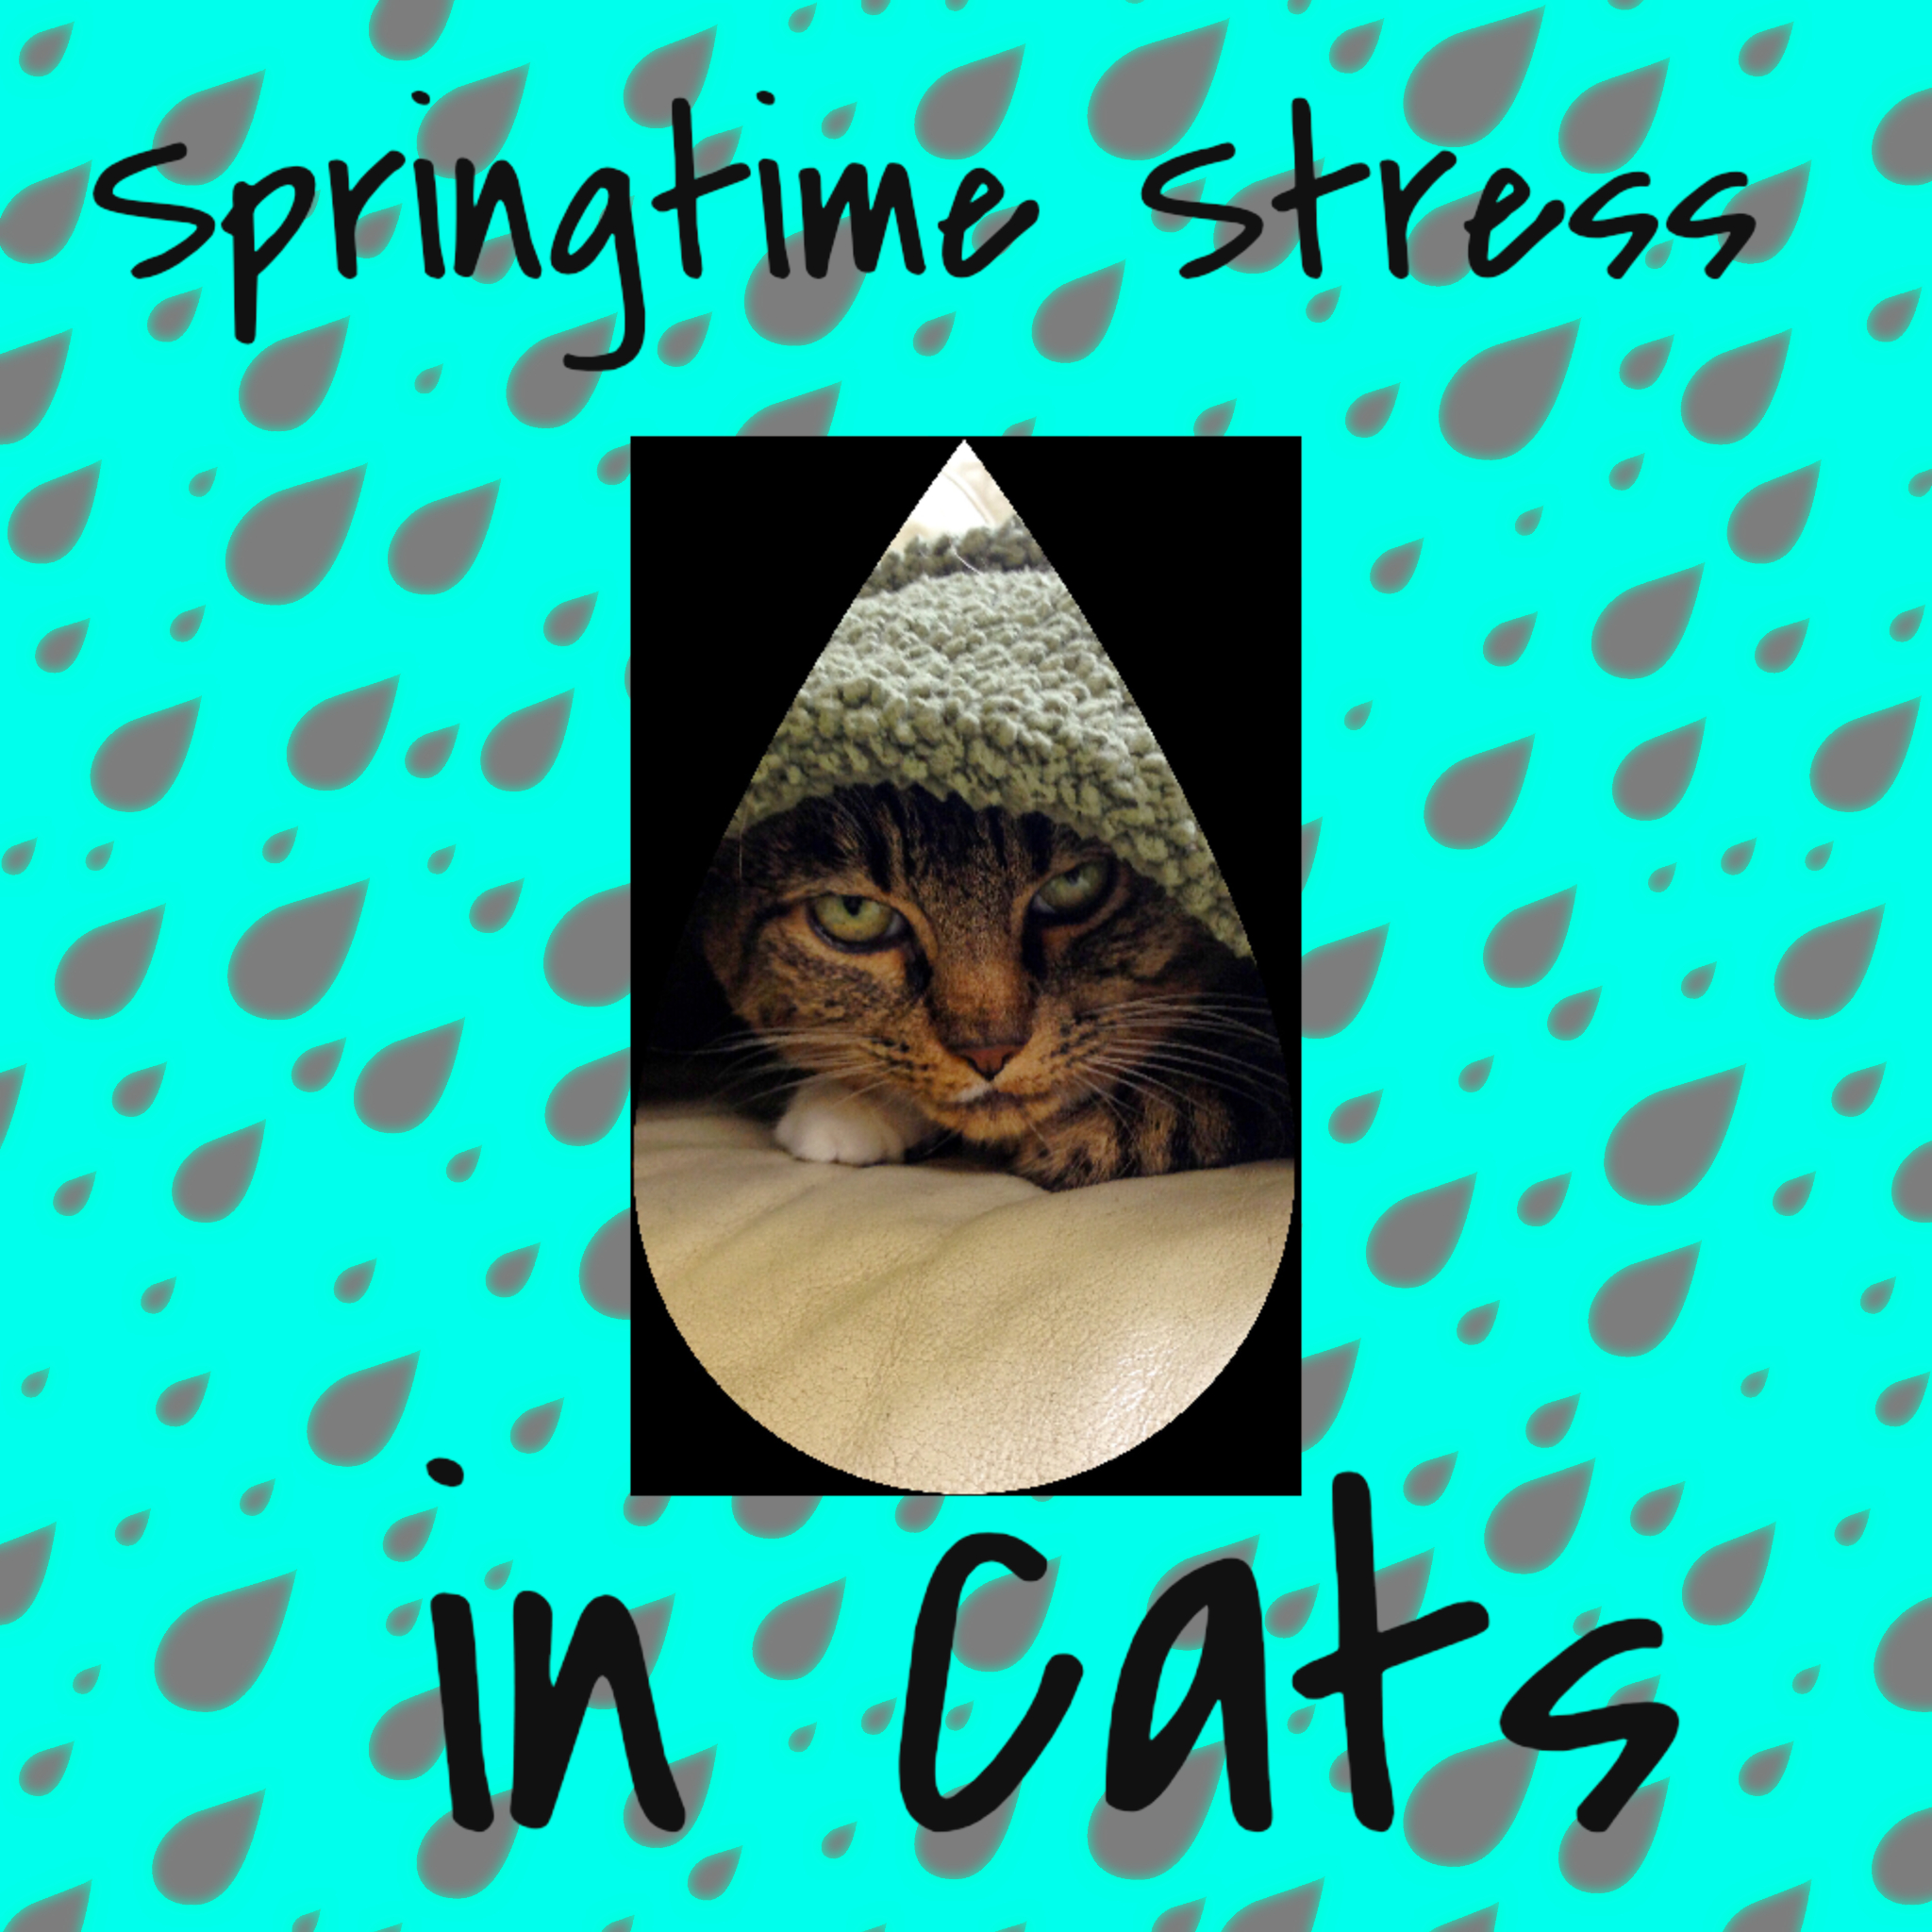 Springtime stress in cats